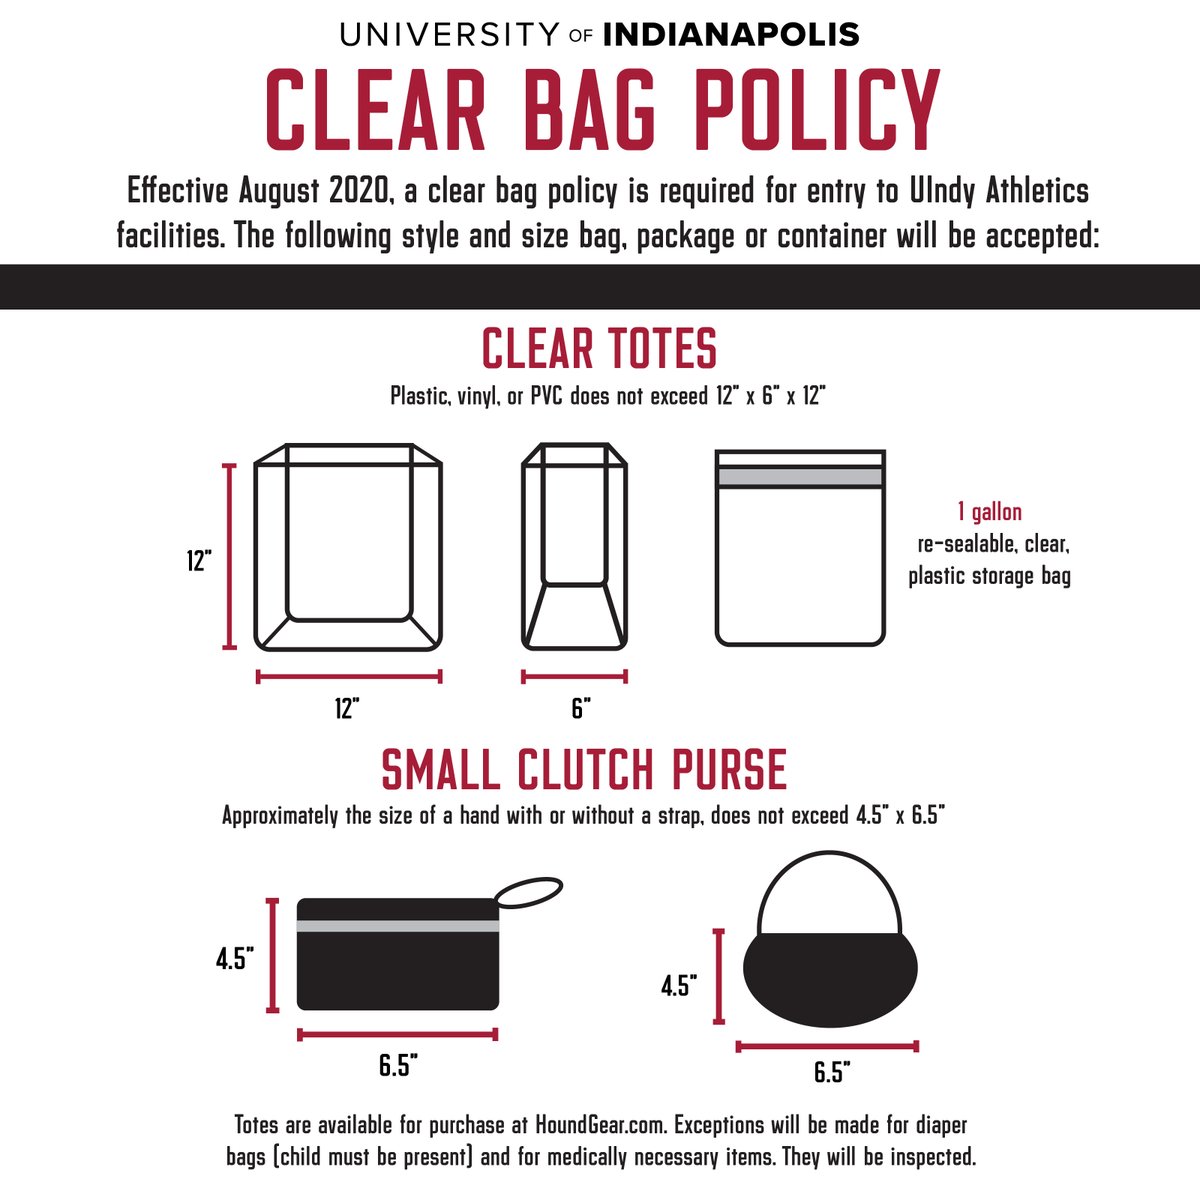 Graduates and guests, please note that our clear bag policy will be enforced at all three of this weekend's commencement ceremonies. For more information about what is and is not permitted to be brought to the ceremonies, please visit bit.ly/3xYUG9N. #uindygrad